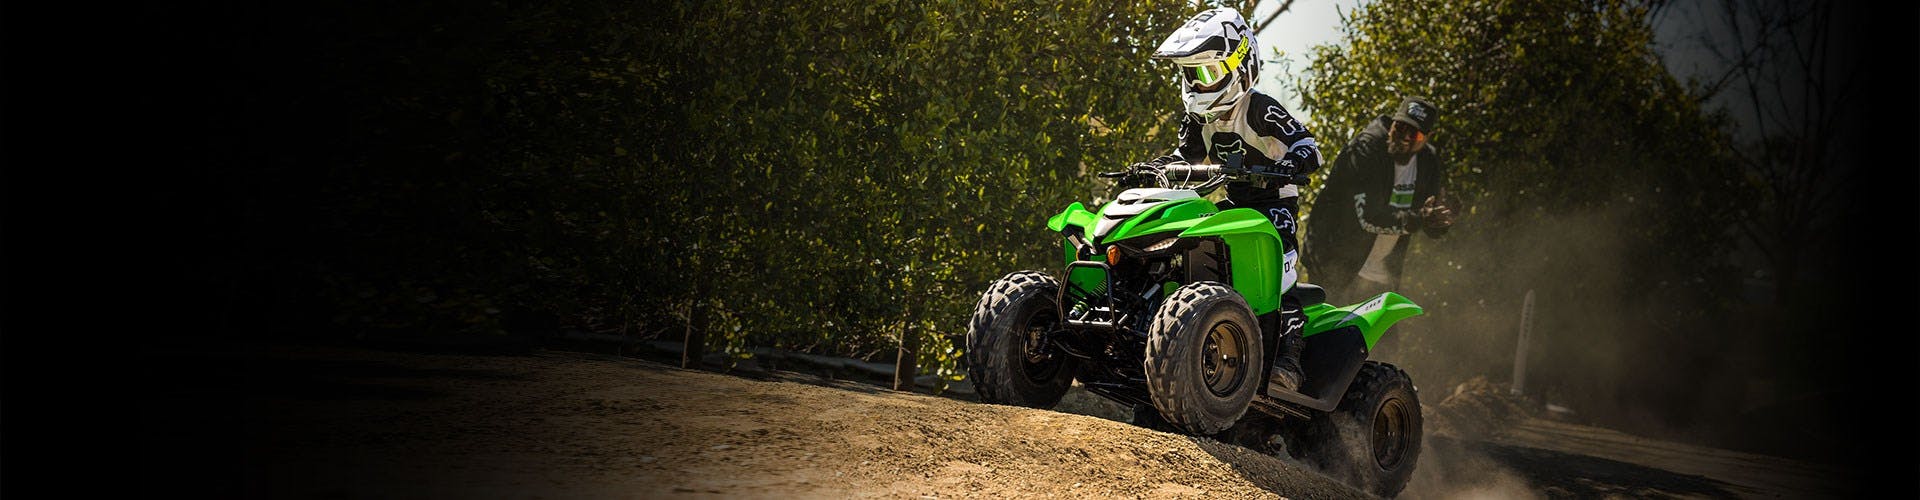 Kawasaki KFX90 in lime green colour on off road track